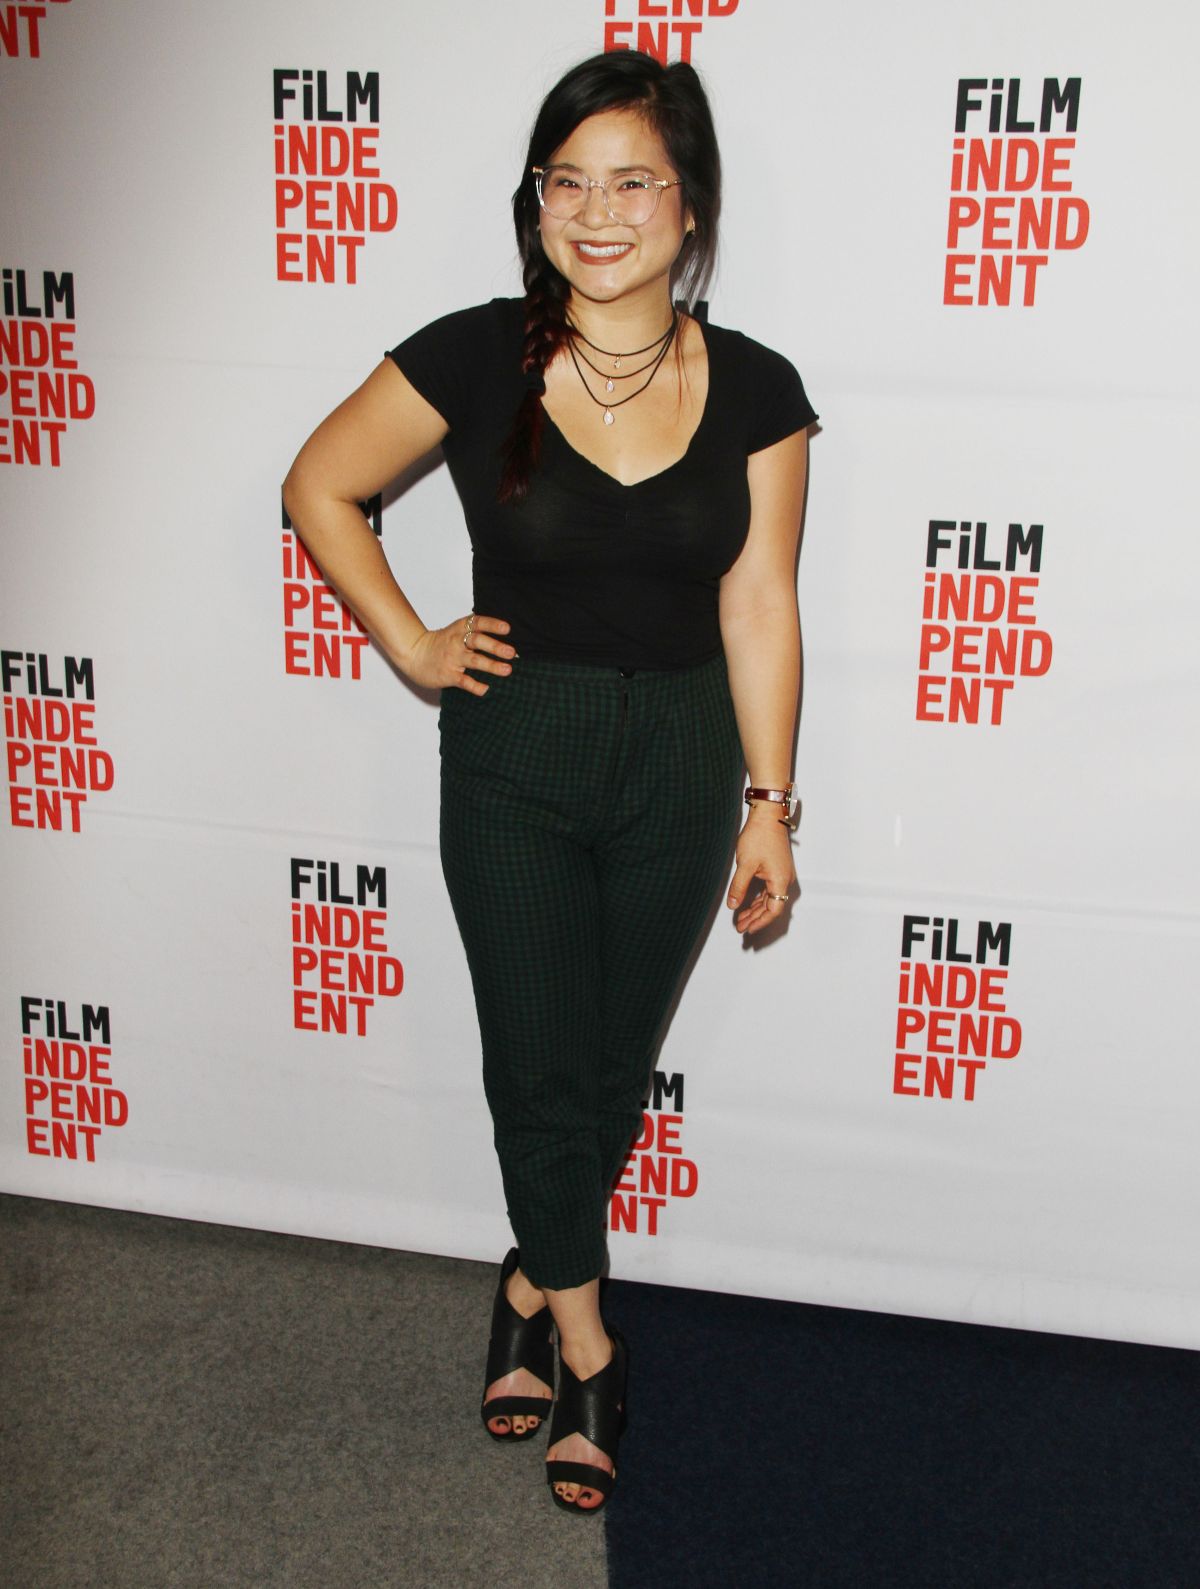 Spoke to the excellent kelly marie tran about raya and the last dragon, sta...